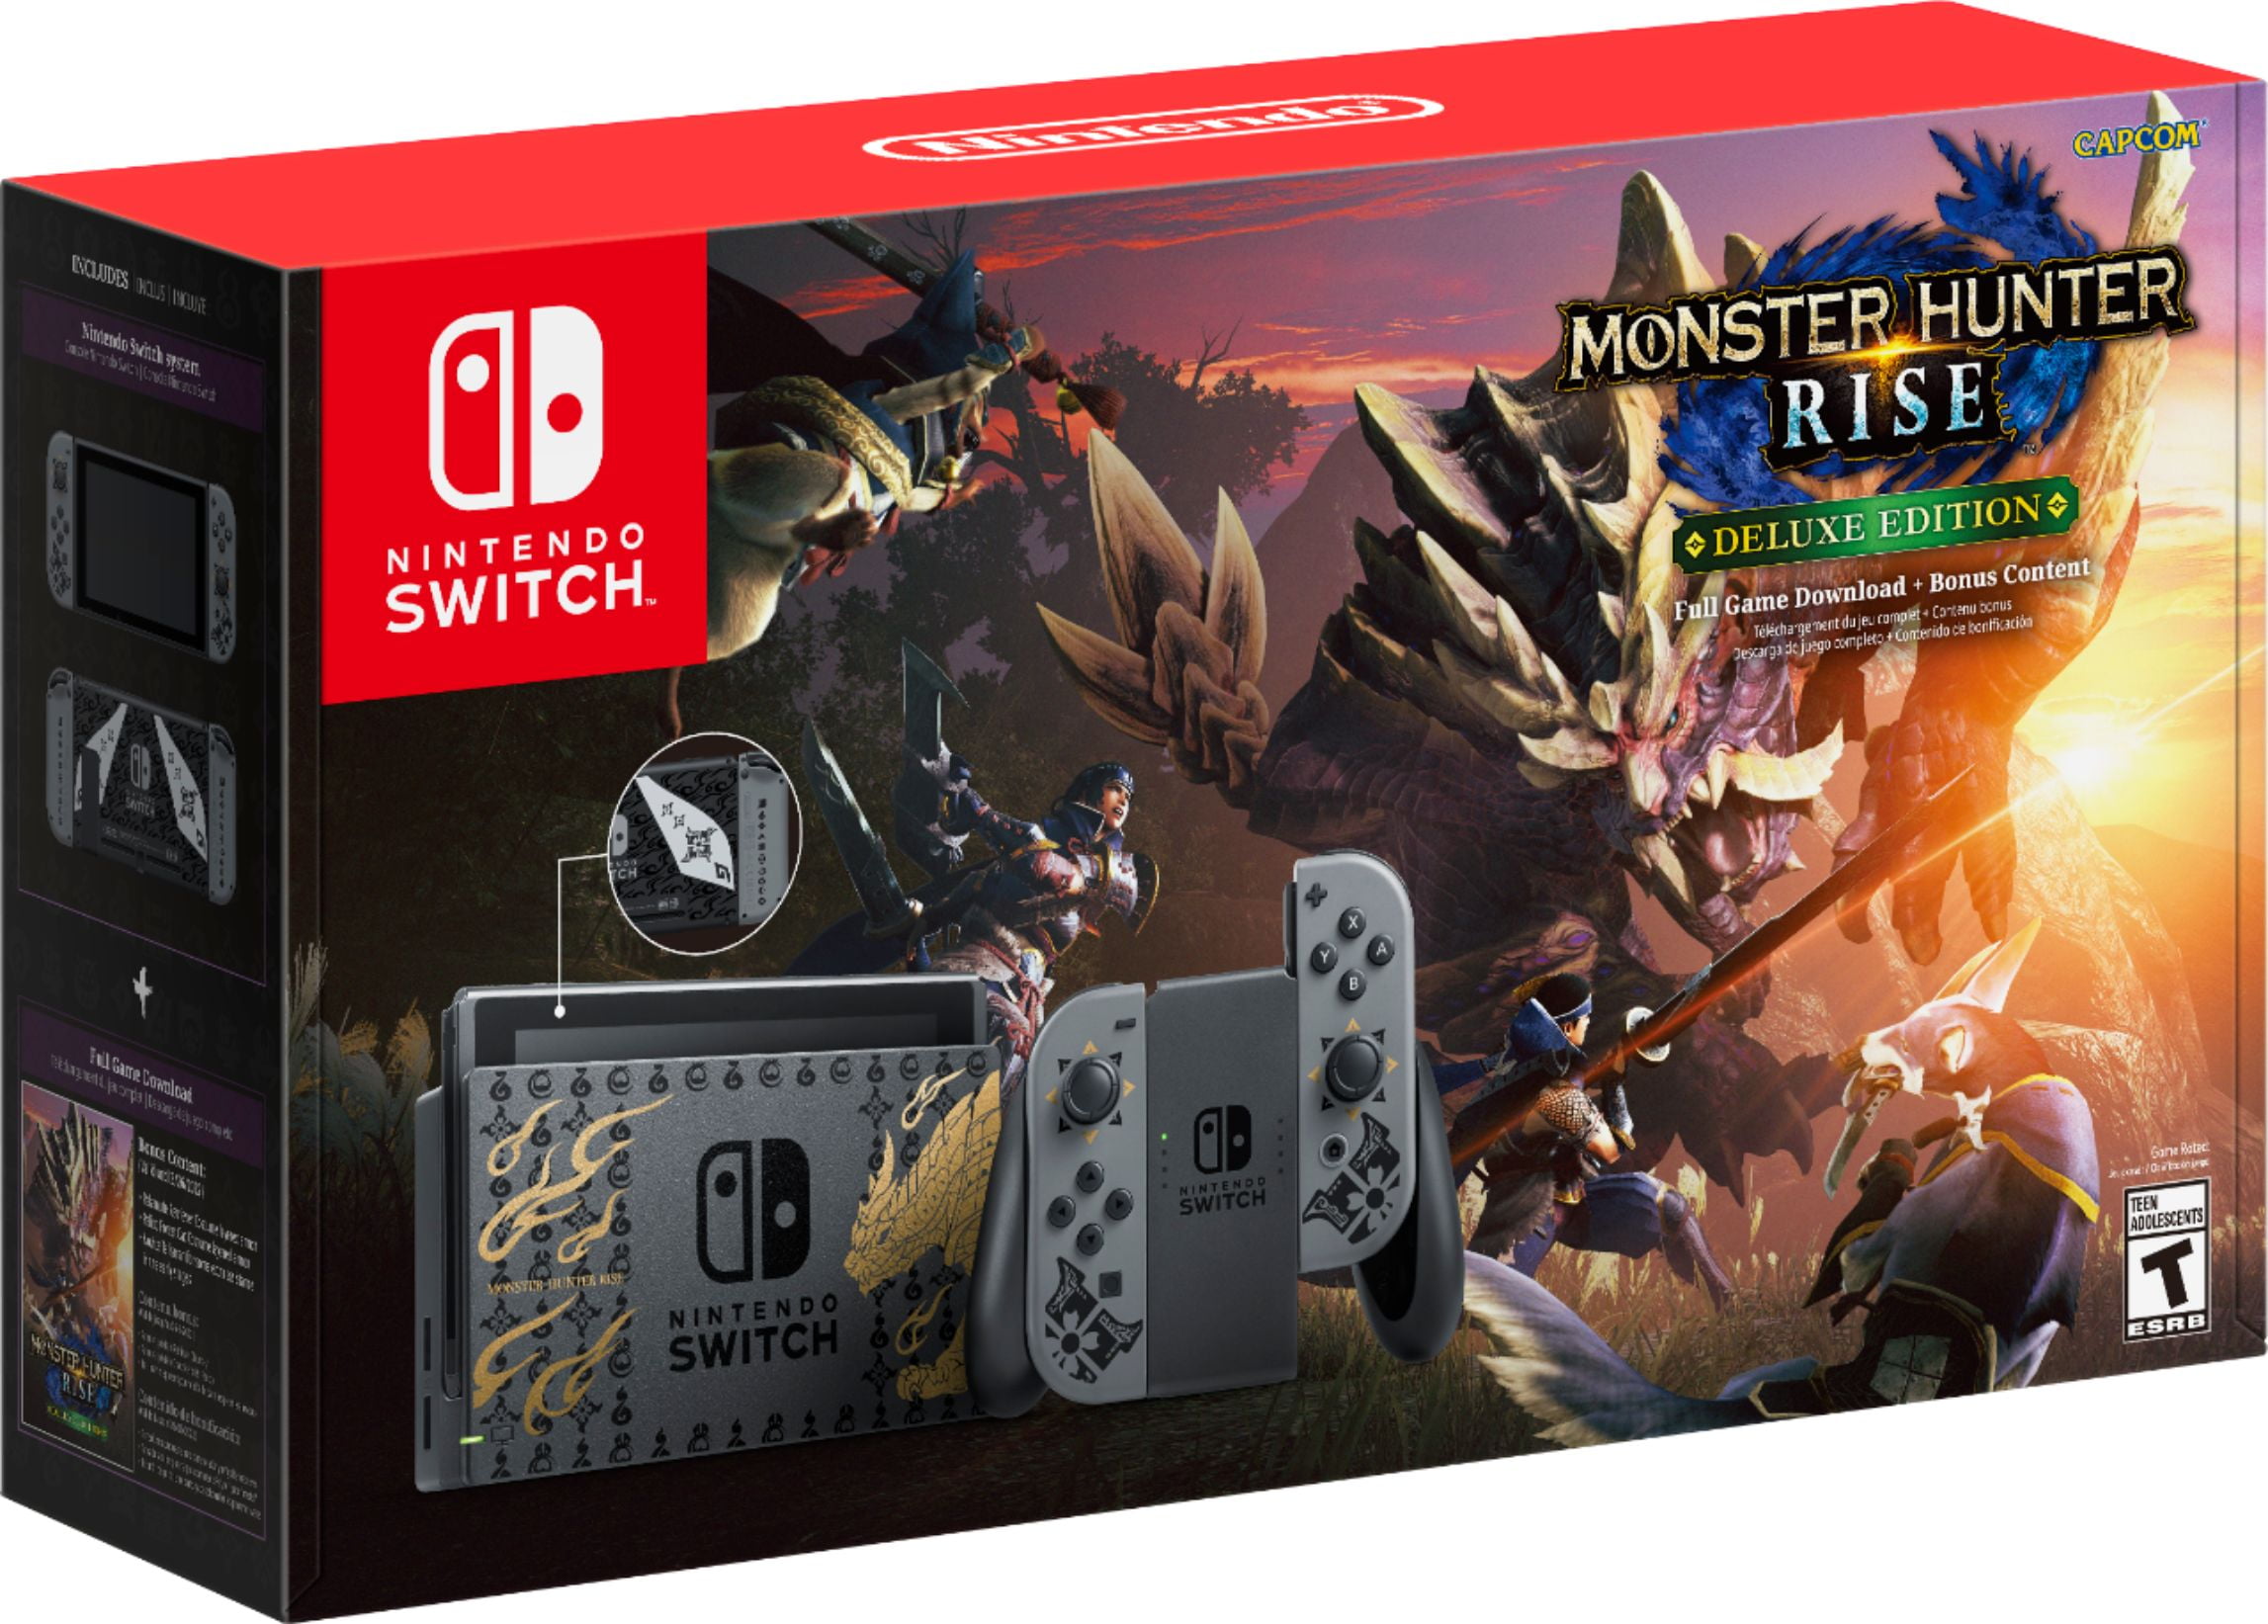 Nintendo Switch MONSTER System - Edition RISE Gray Deluxe HUNTER